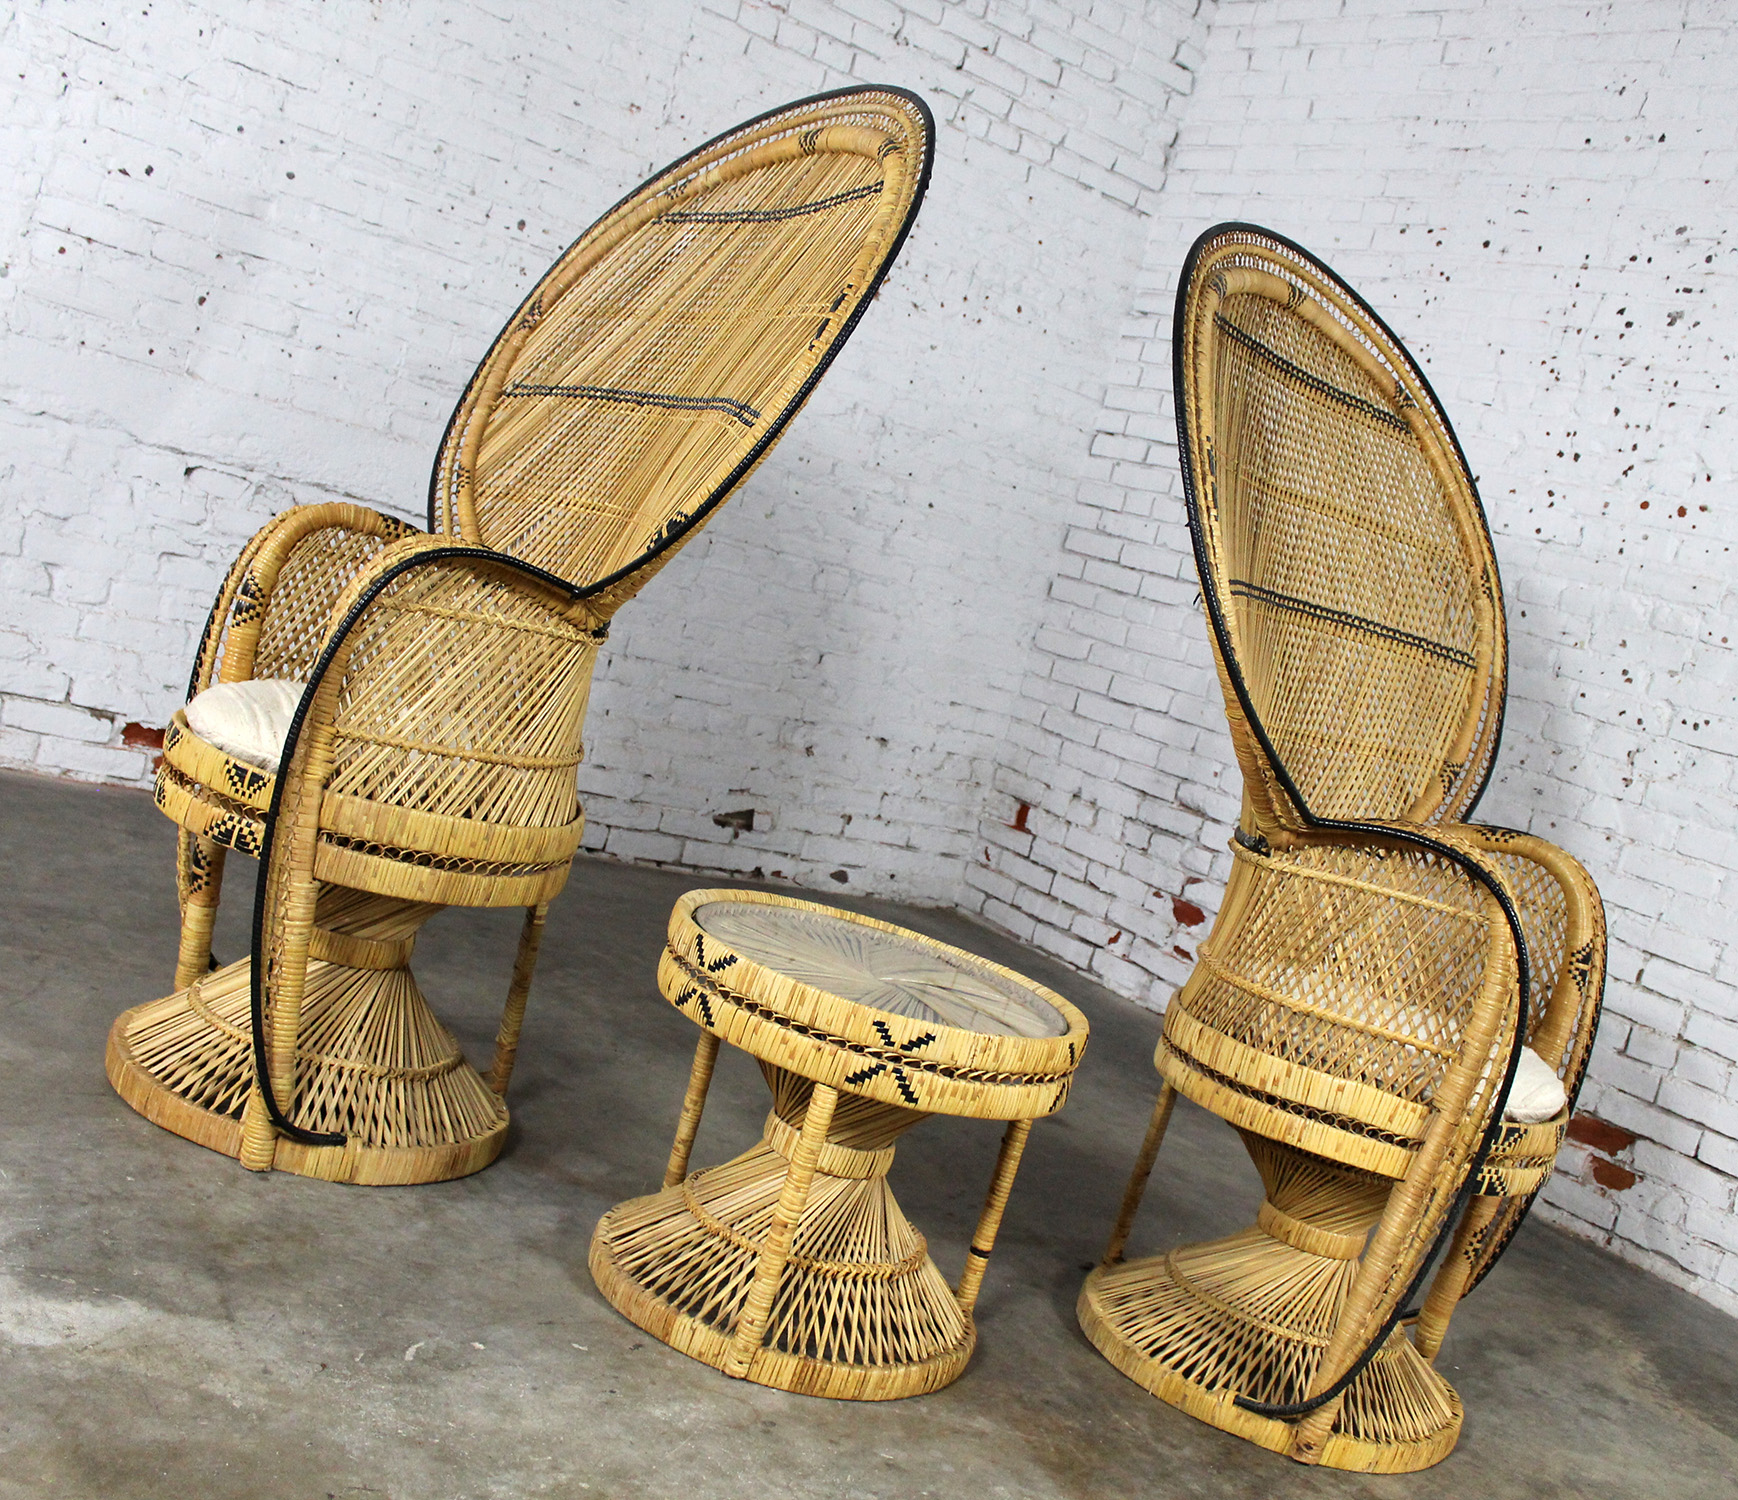 Pair of Wicker Rattan Peacock Fan Back Chairs and Side Table Vintage Bohemian